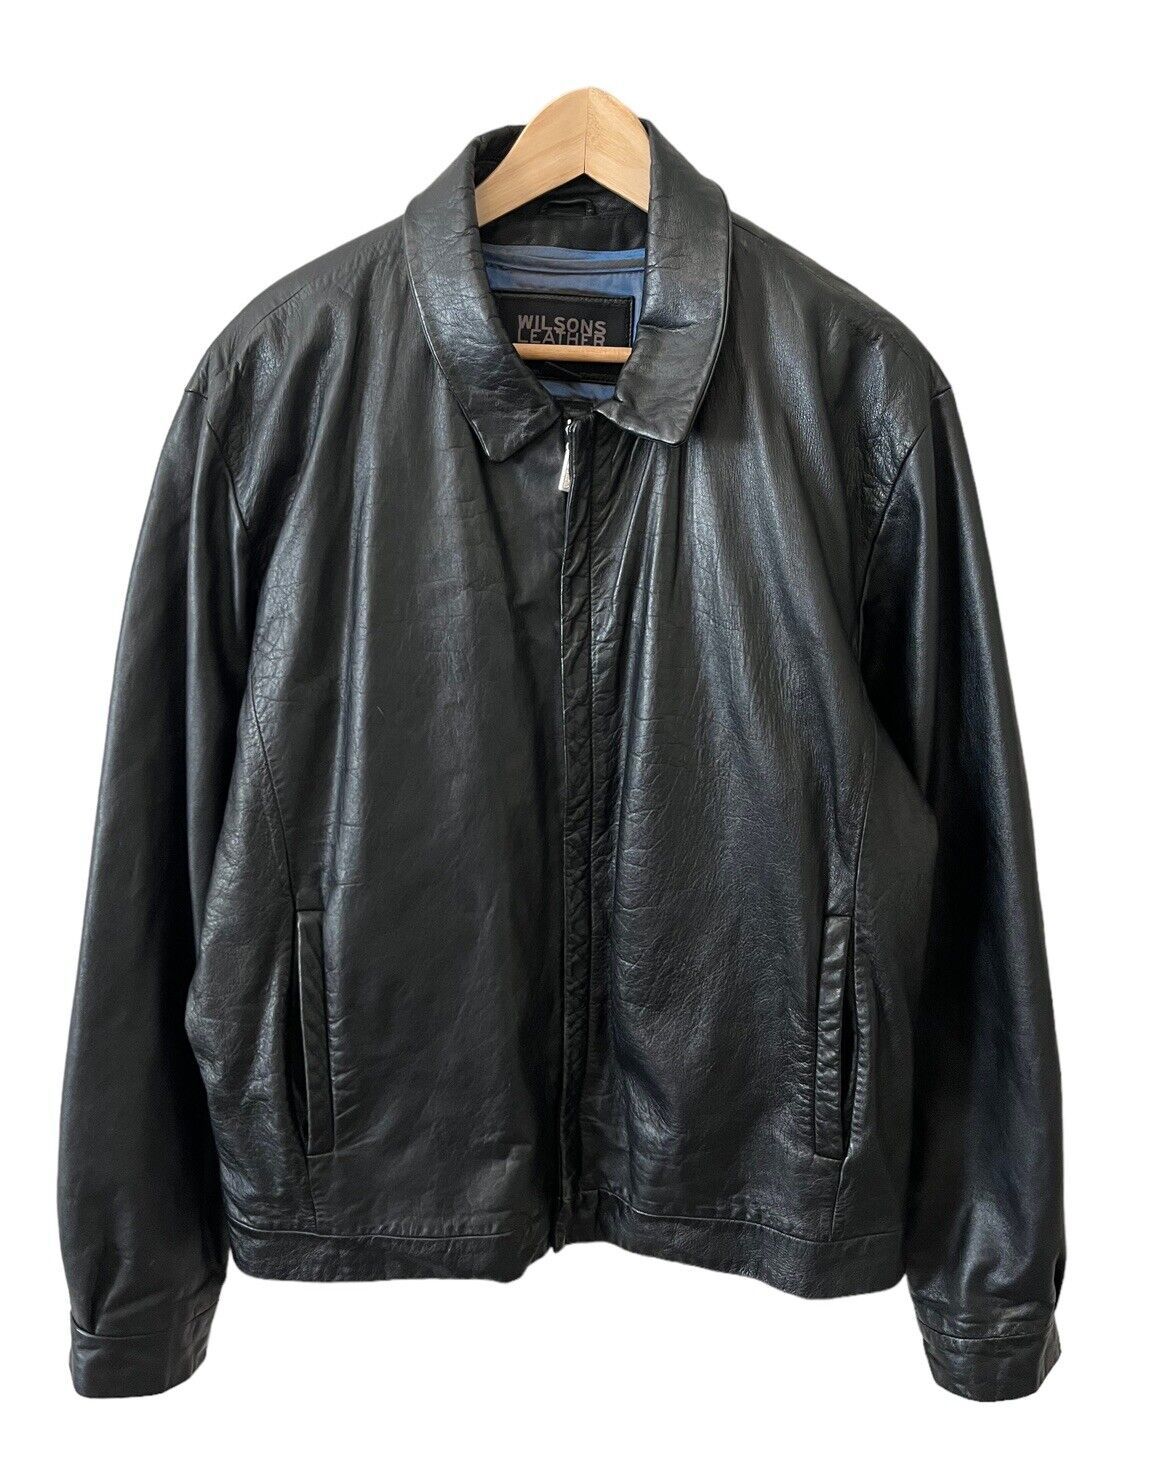 Men’s Wilson’s Black Leather  Jacket with Thinsulate Liner XL  | eBay | eBay US